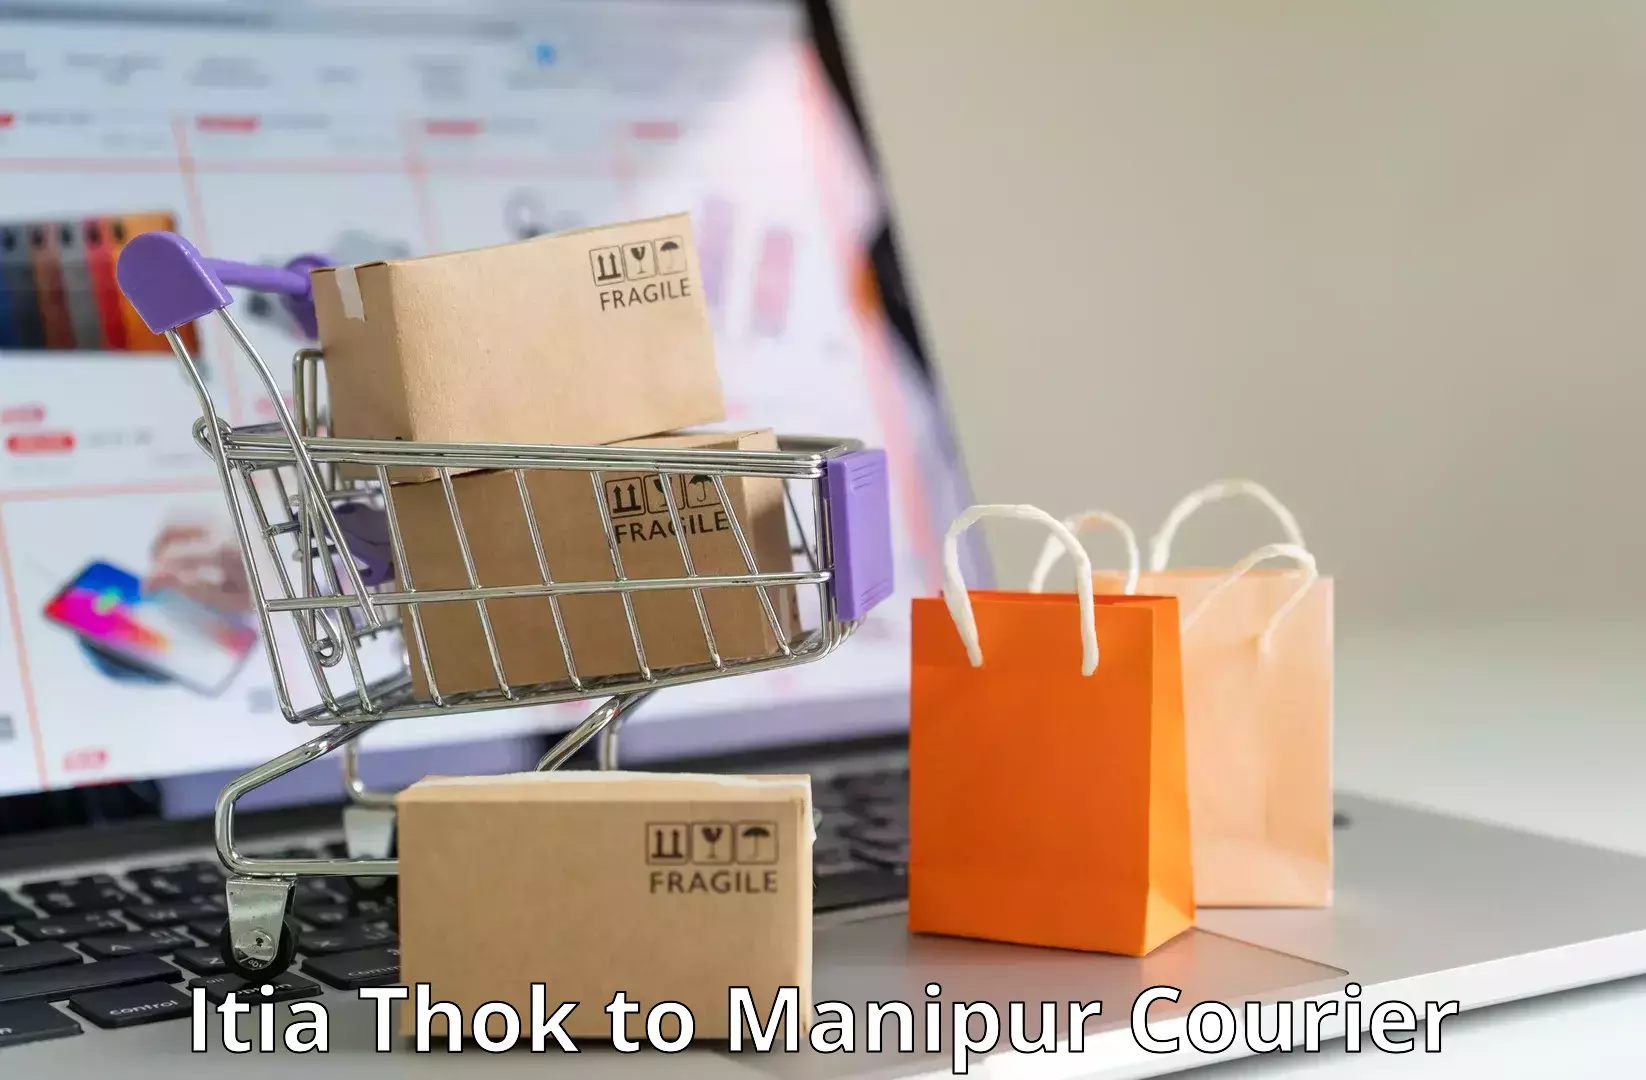 Expedited shipping methods in Itia Thok to Manipur